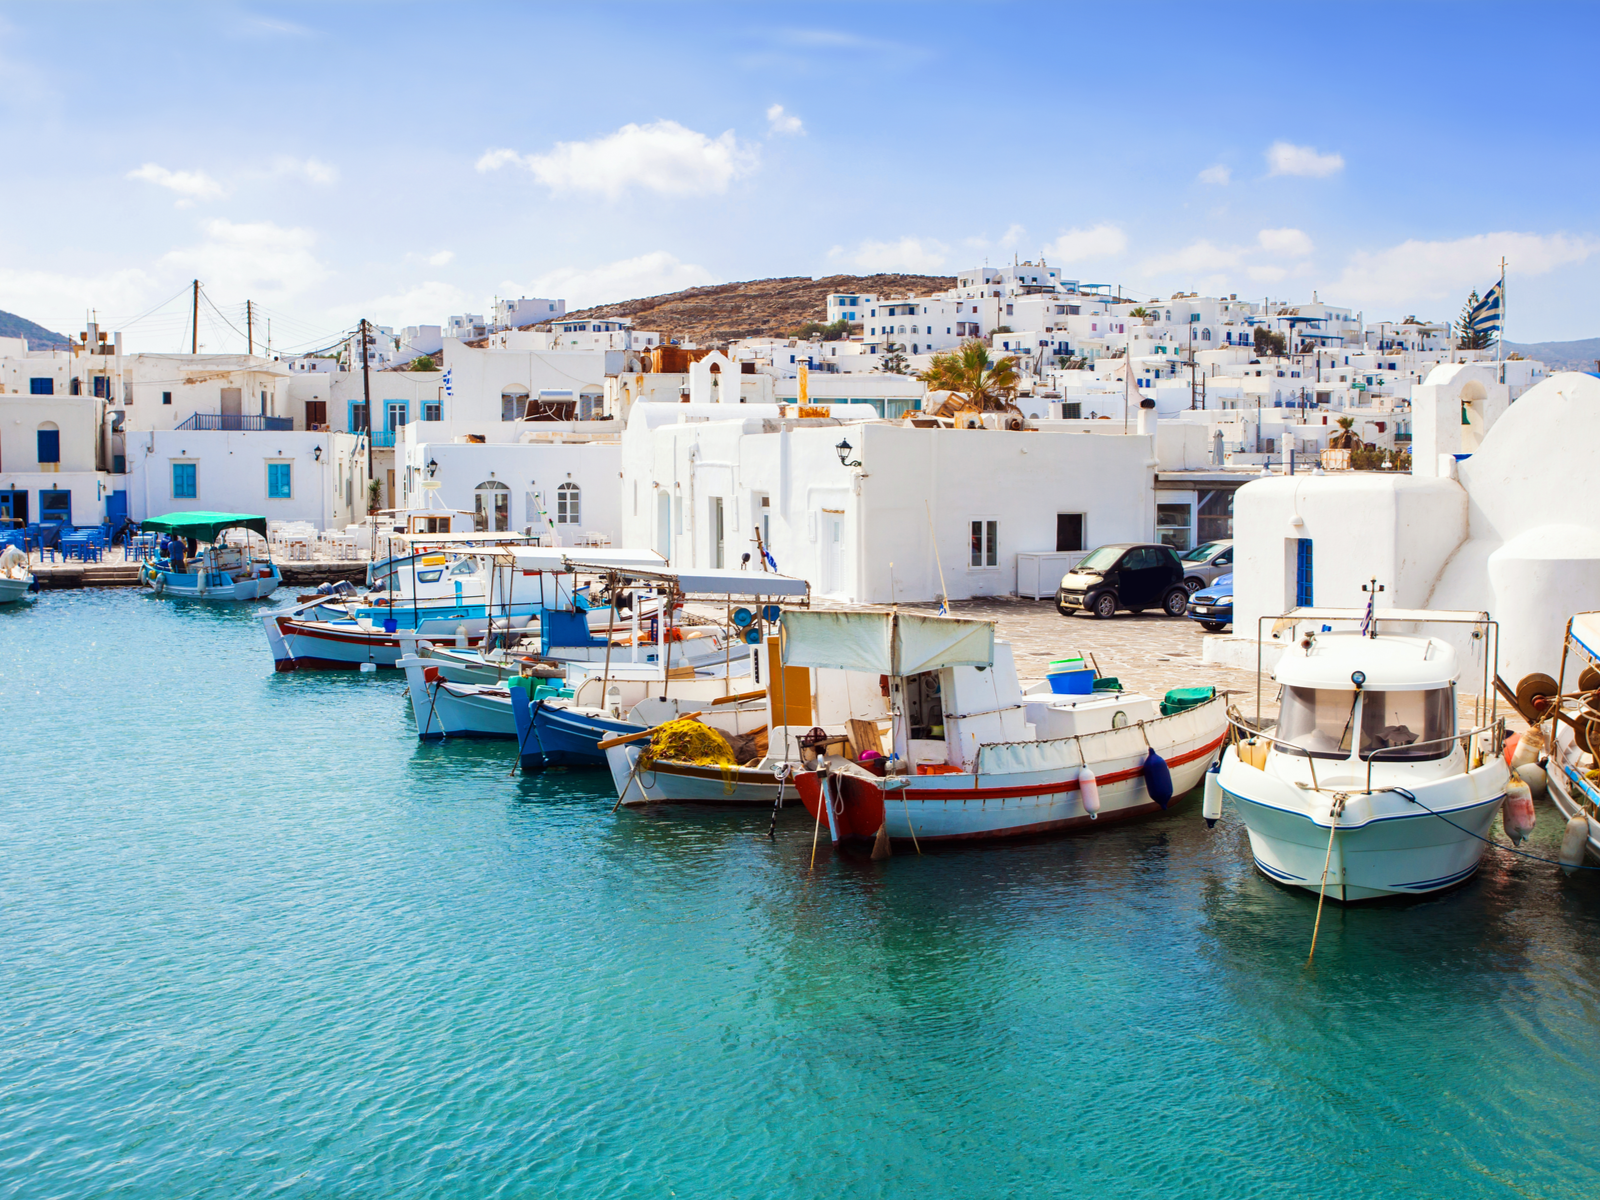 Several fishing boats docked at the coast of Naousa Village at Paros Island, one of the best islands in Greece to visit, where cars are parked near its signature white houses